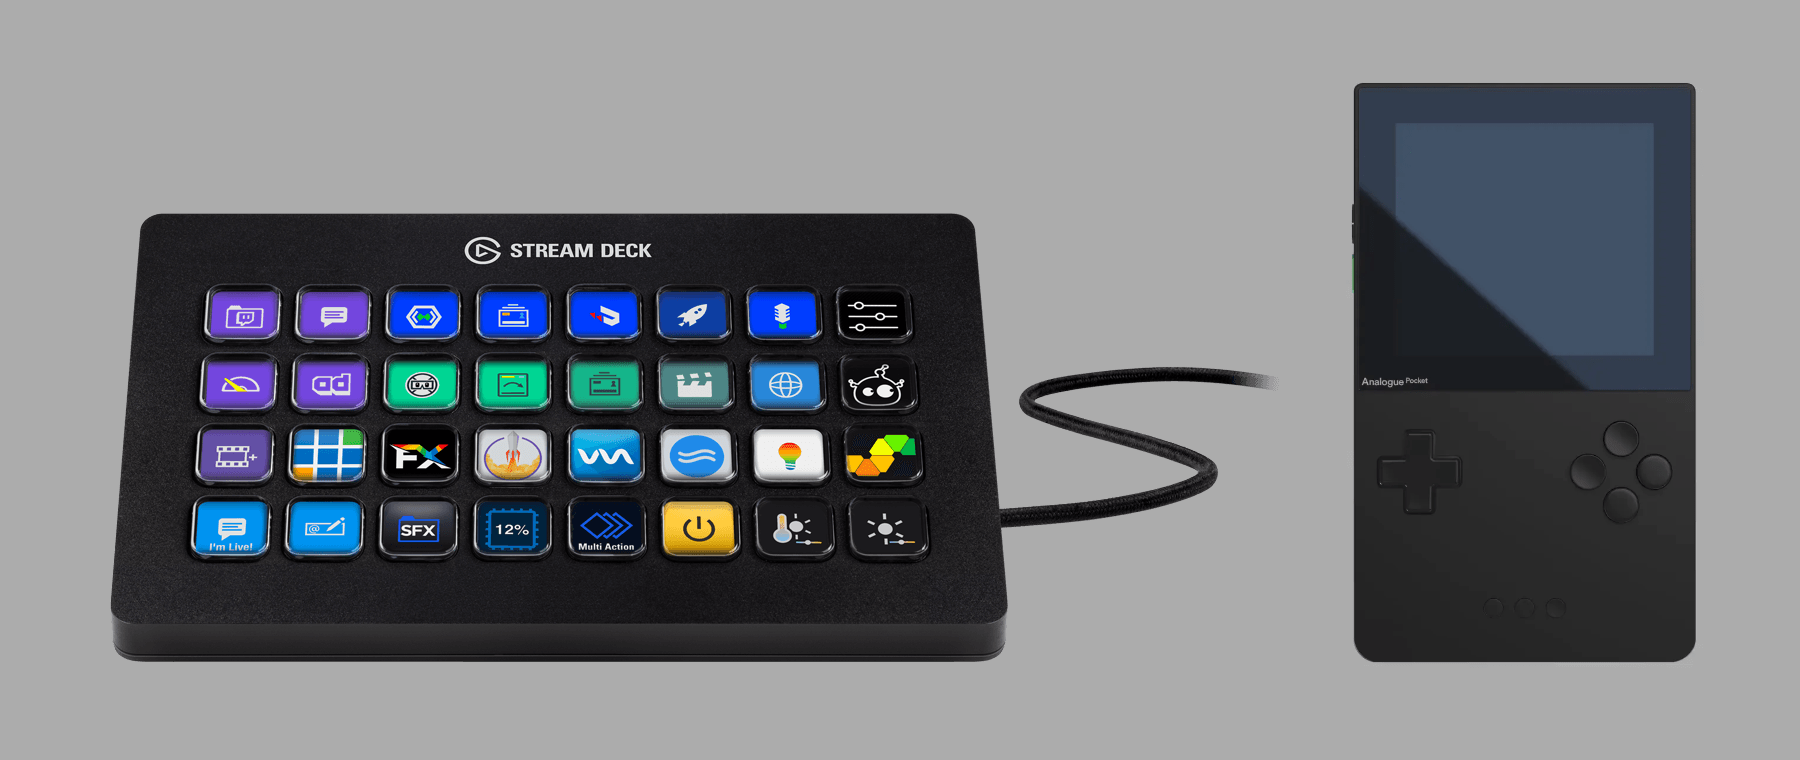 Winner of the Best Overall Shortcut award will receive a Stream Deck XL, Analogue Pocket, and other prizes.